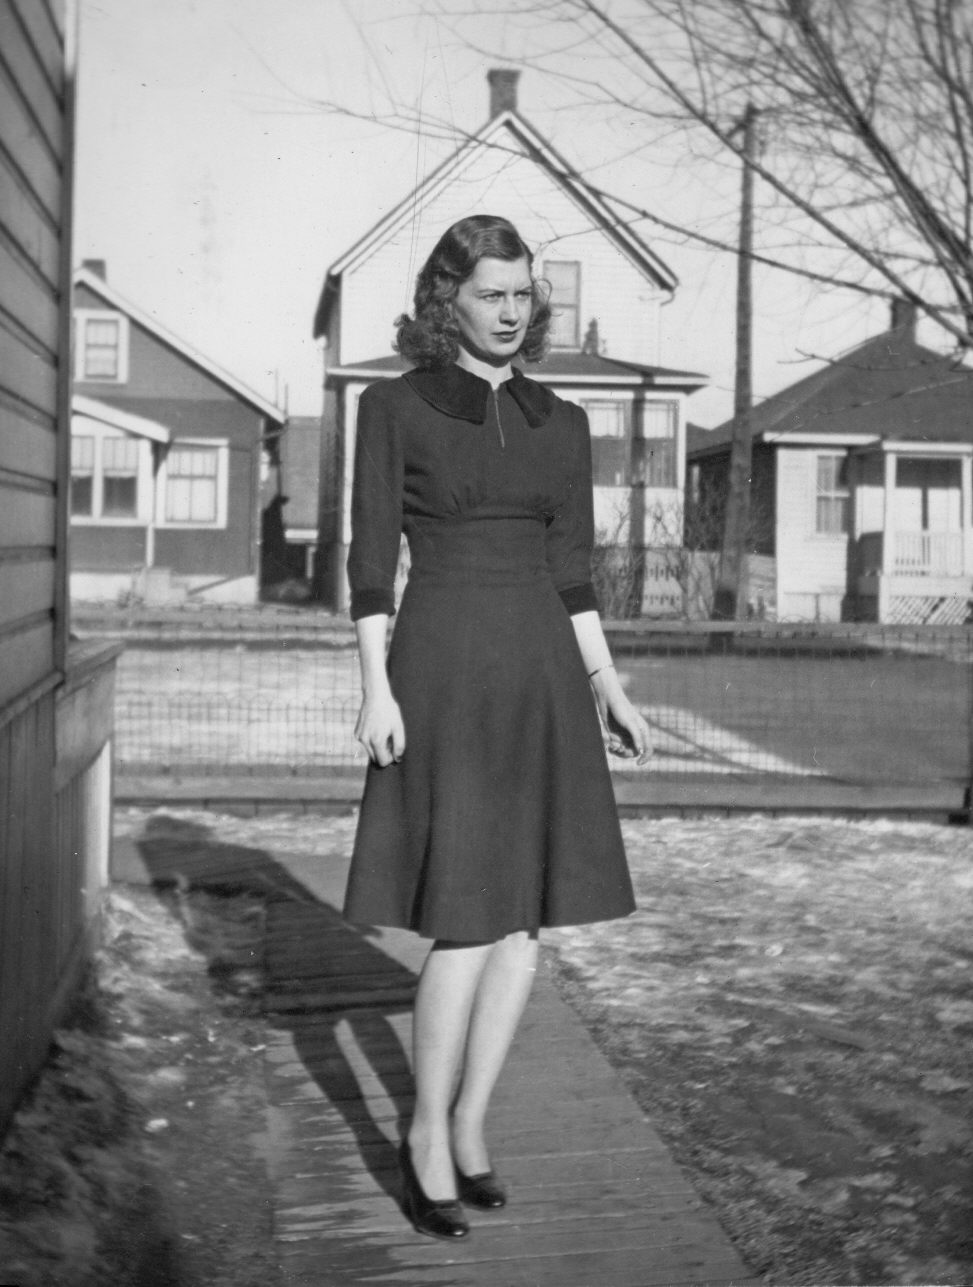 A beautiful photo of my mother Noreen (at 19 years old) taken in the spring of 1940.  A year later she married my father John, and two years later she would accompany him to the west coast of Canada in Victoria, B.C., where my dad served as sergeant in the Canadian army.  In June of 1944 I would be born out there.  They returned to Fort William Ontario(now Thunder Bay) in early 1945 and my Dad was then shipped off to England for another couple of years before the whole thing was over.  This is one of my favorite photos of my mother. View full size.